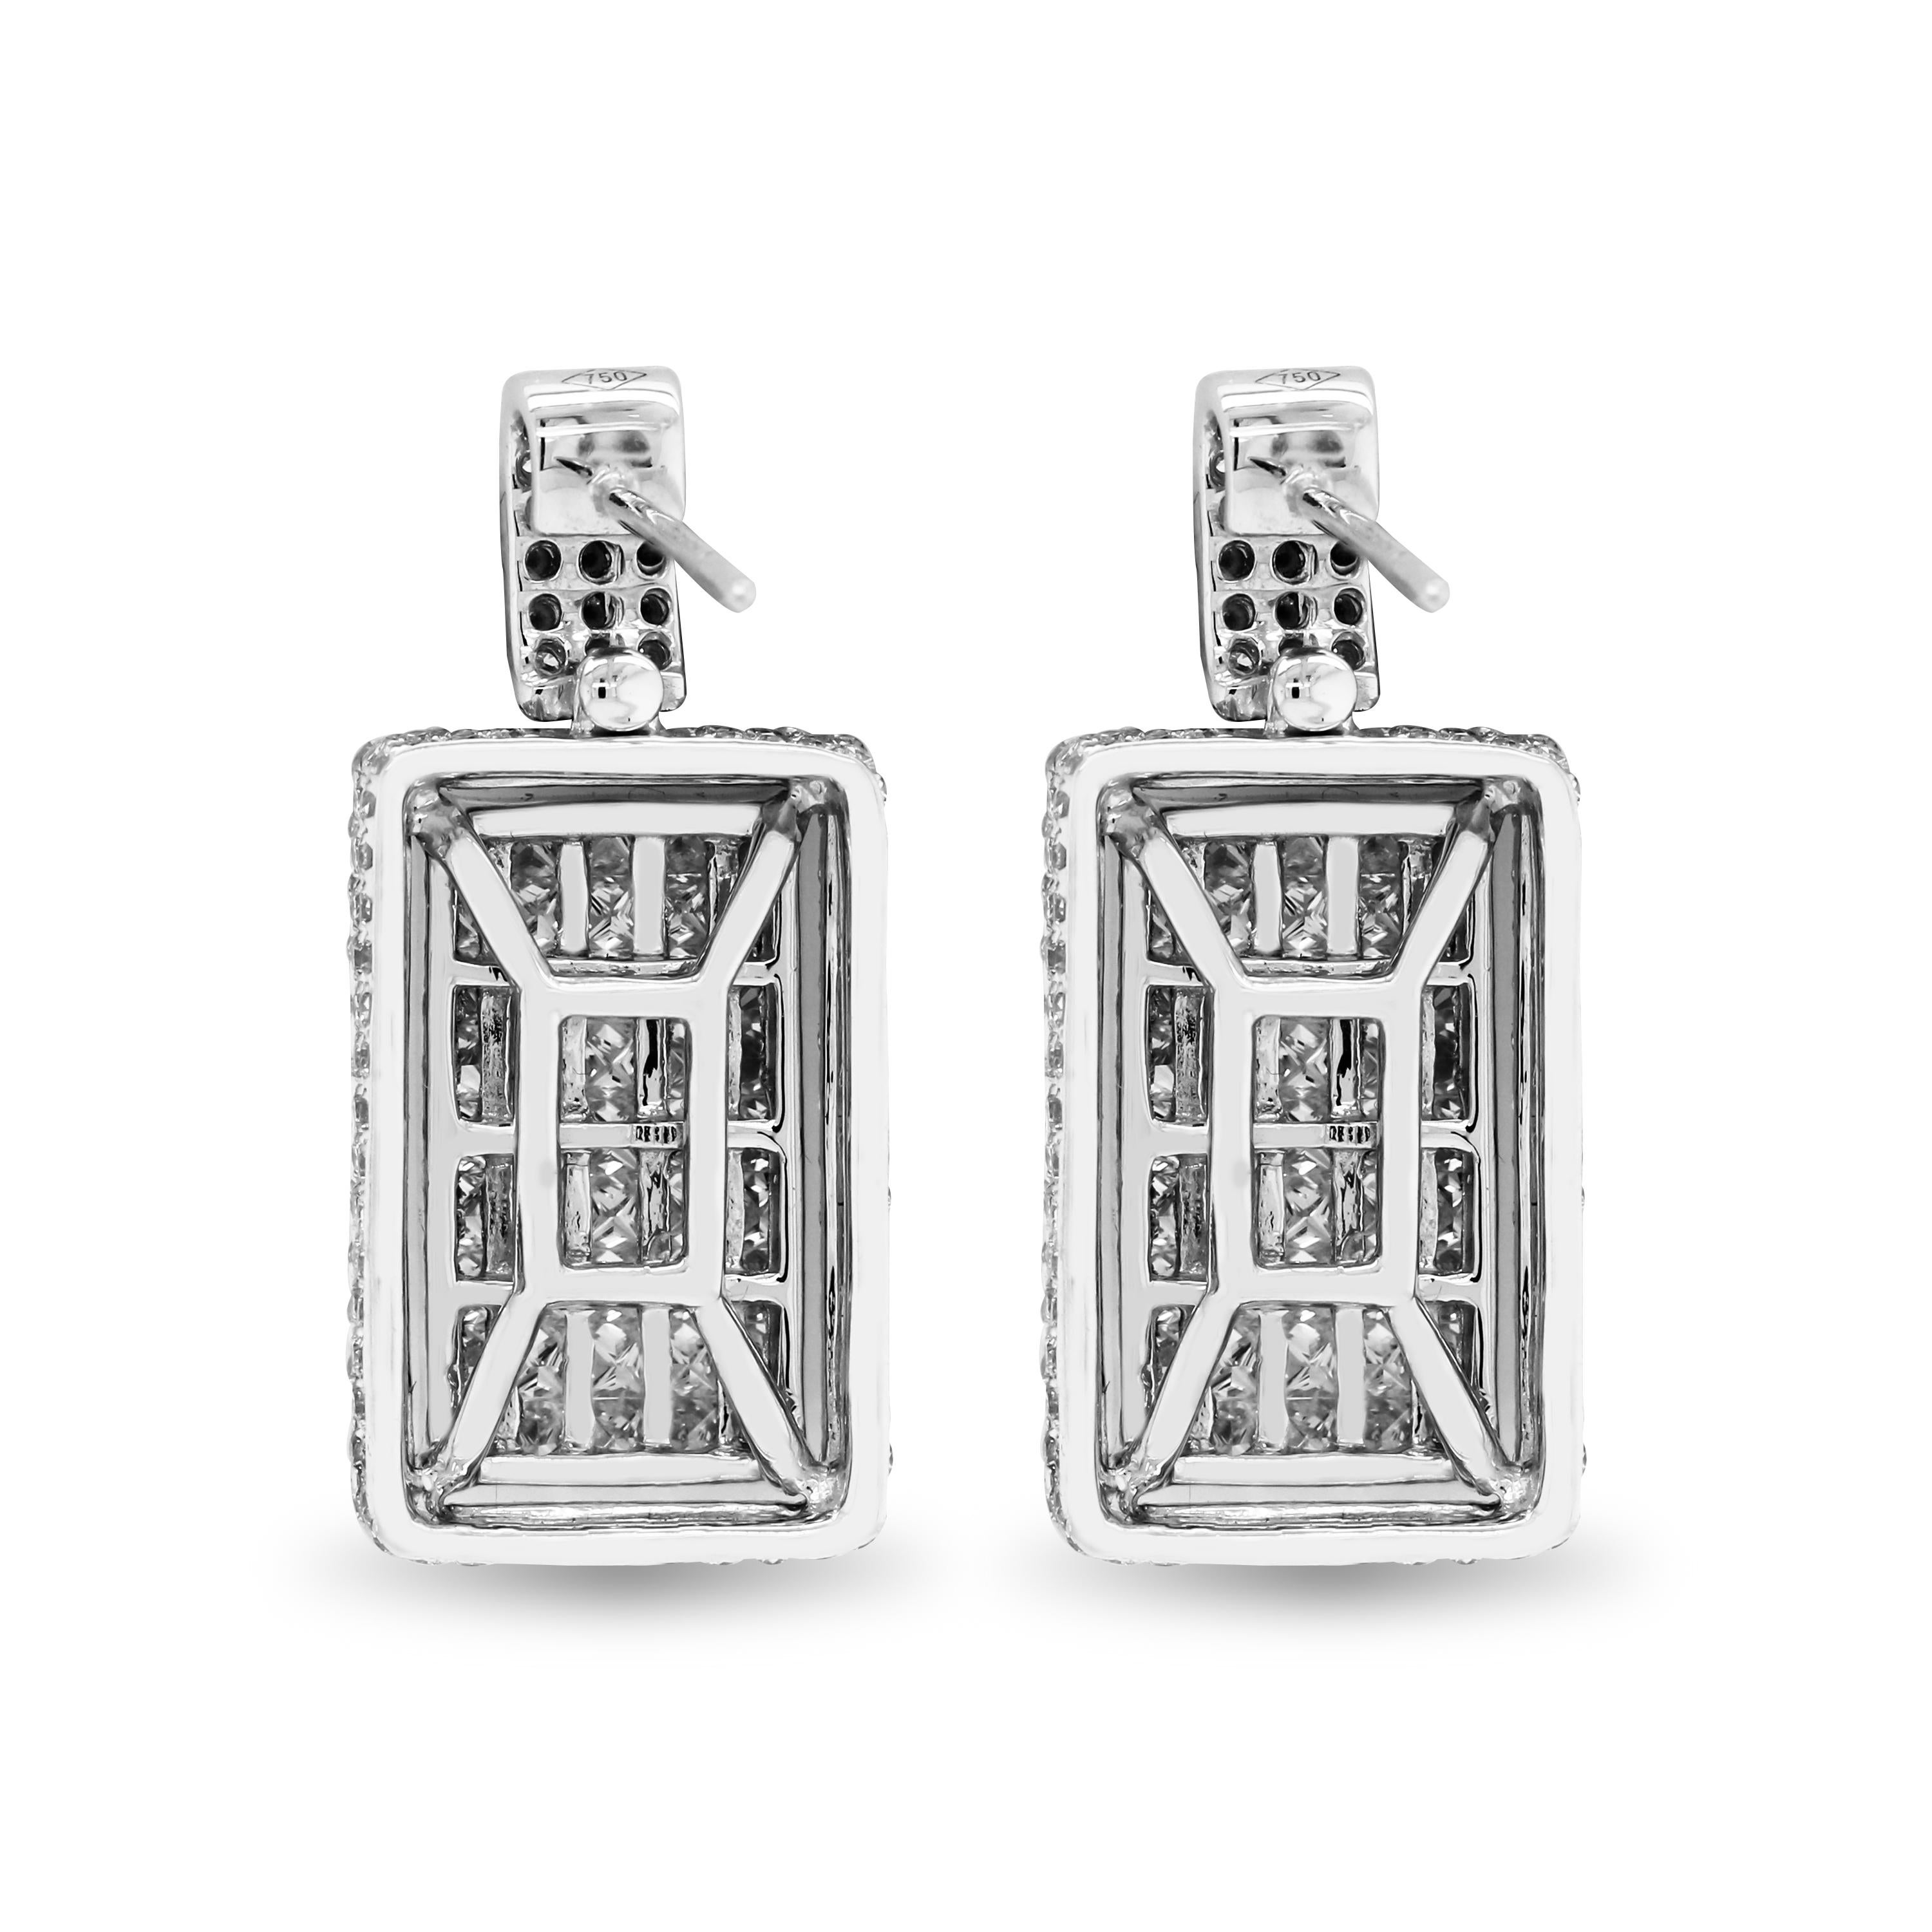 18K White Gold Princess and Round Cut Diamond Drop Earrings

These beautiful earrings feature two rectangle shape drops with princess and round cut diamonds with a three-row diamond top

4.87 carat G color, VS clarity diamonds total weight

Earrings